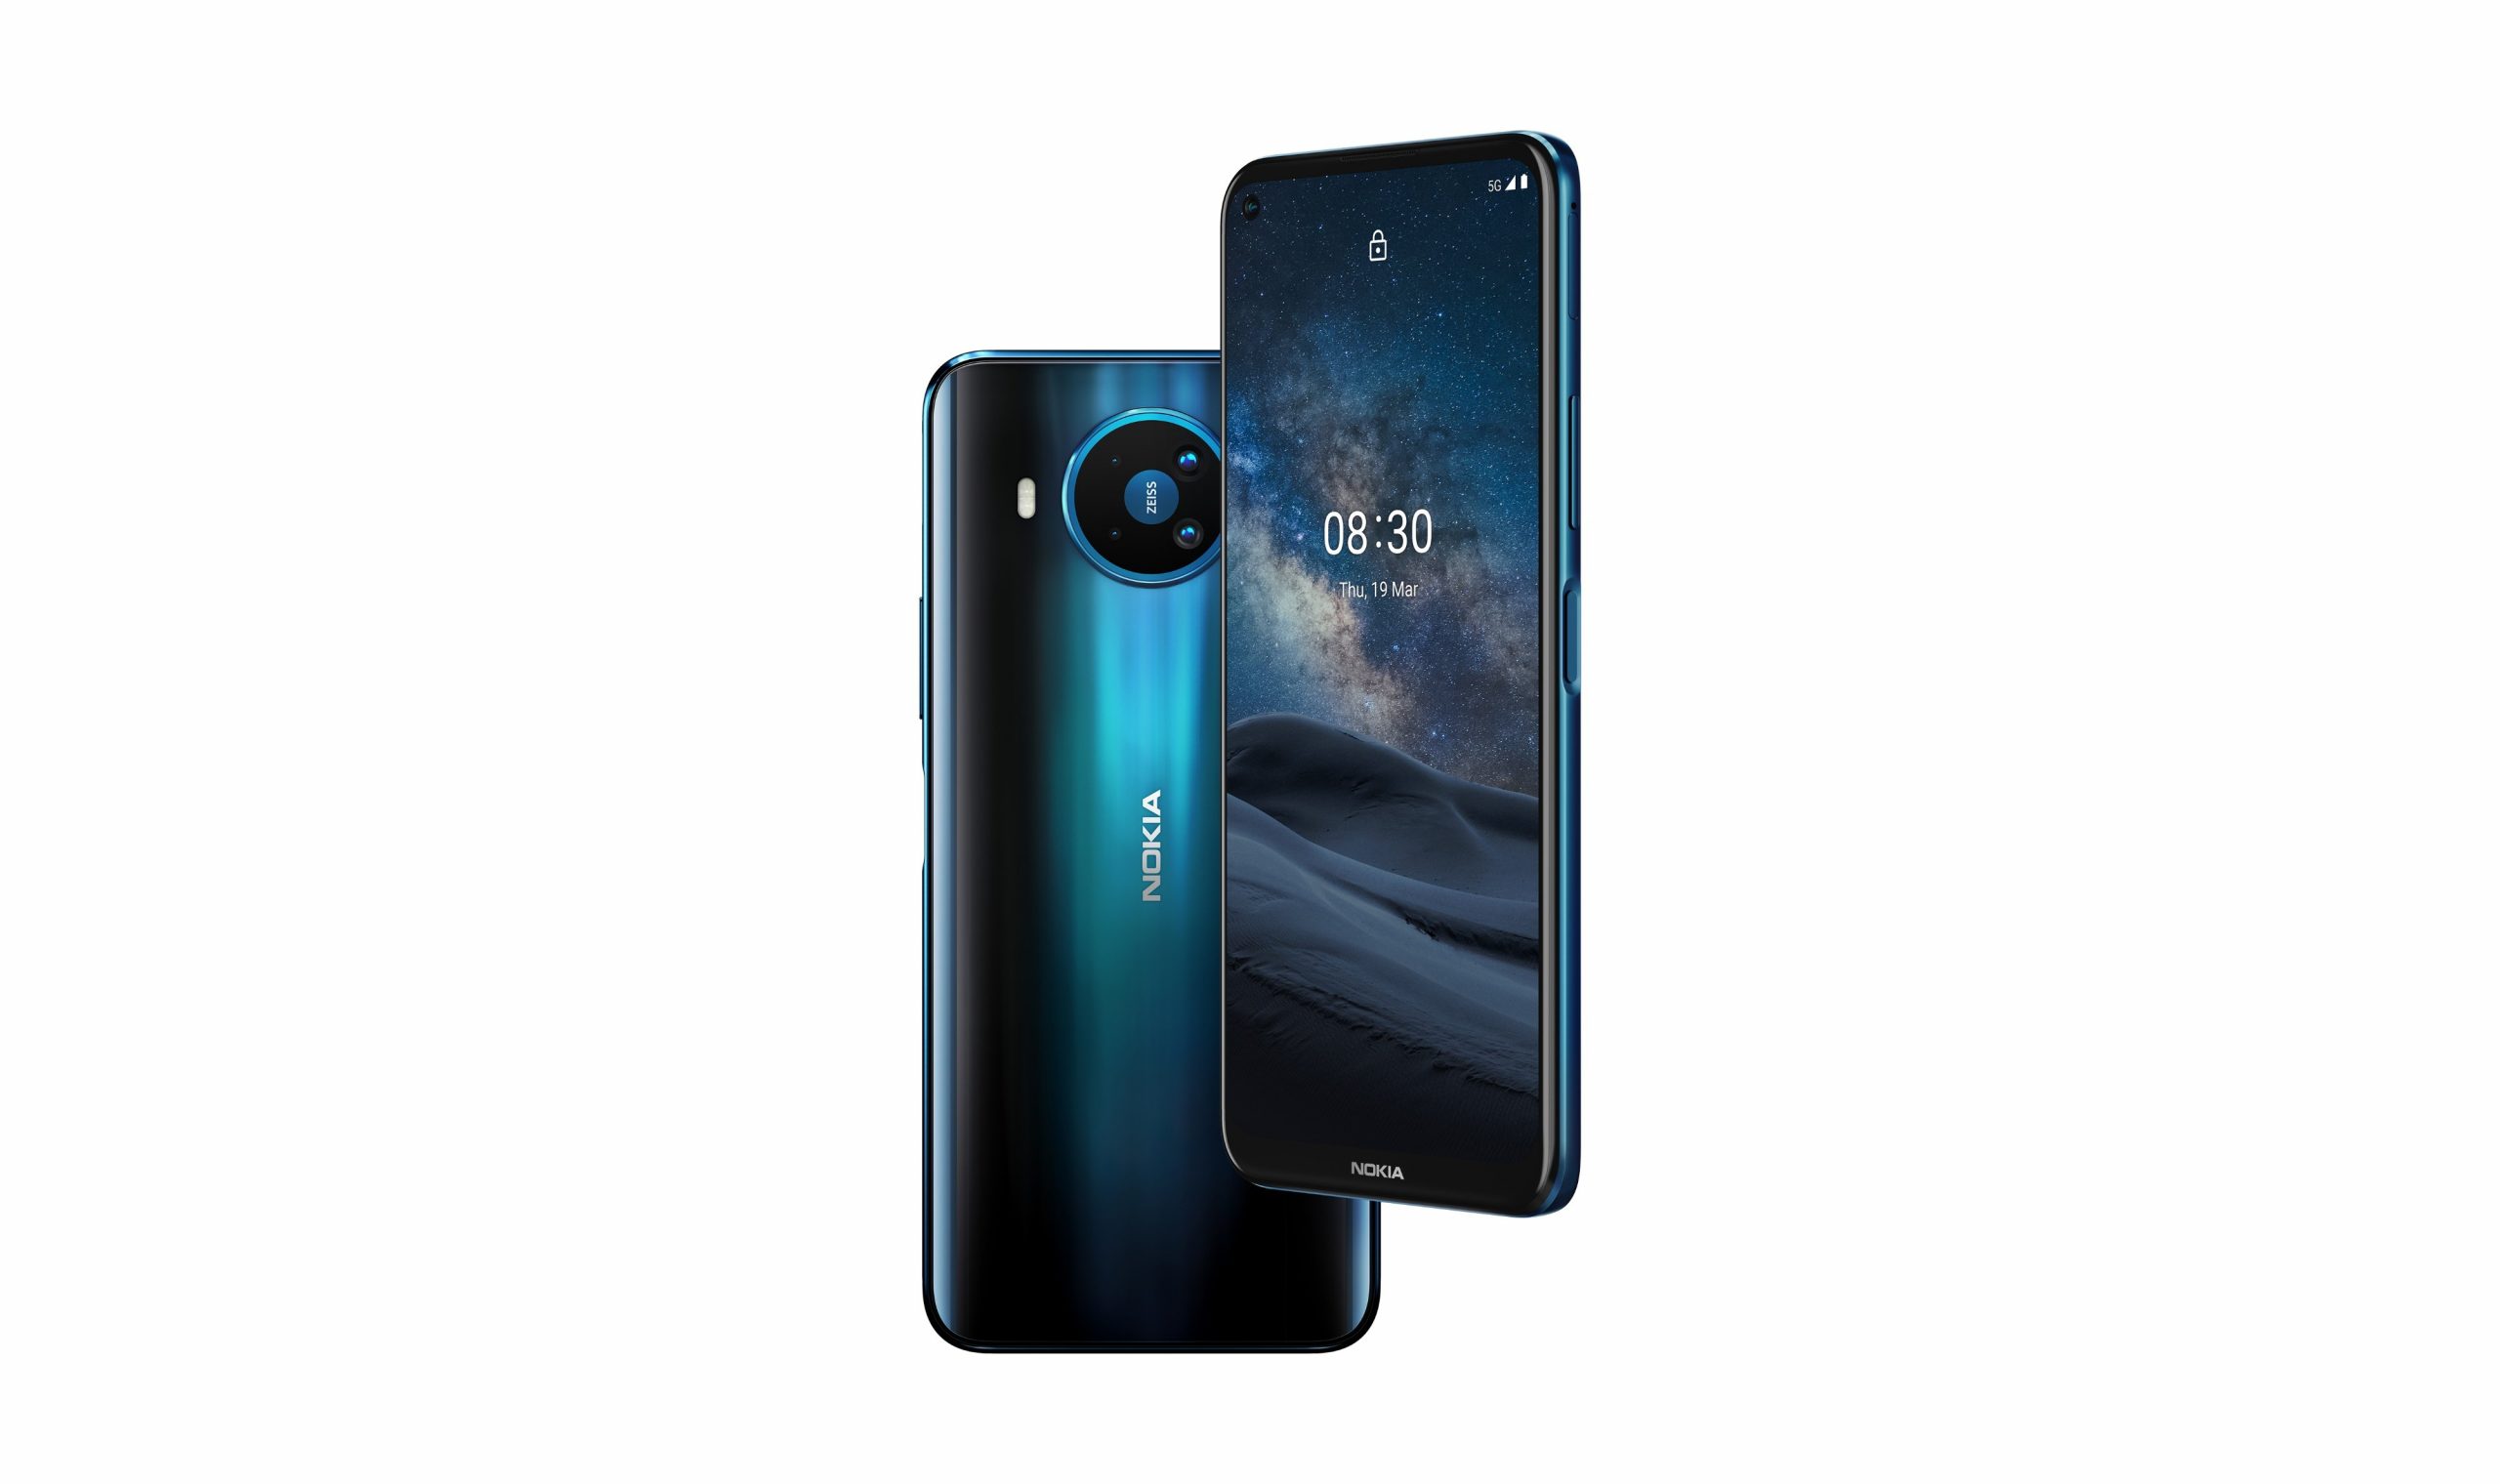 HMD Global is reported to launch four Nokia 5G smartphones in 2021